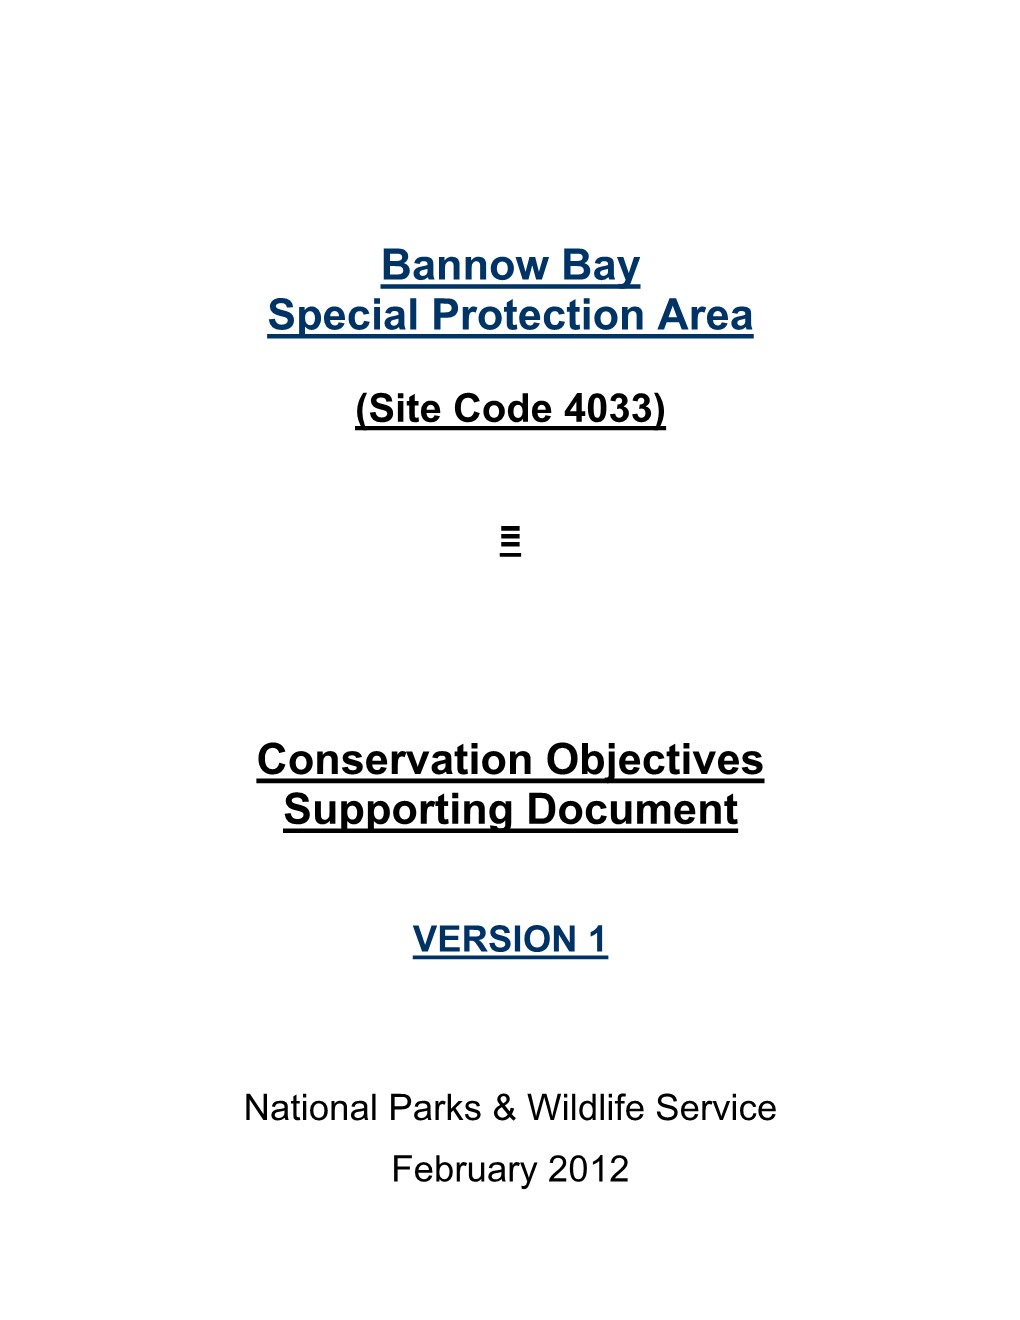 Bannow Bay Special Protection Area